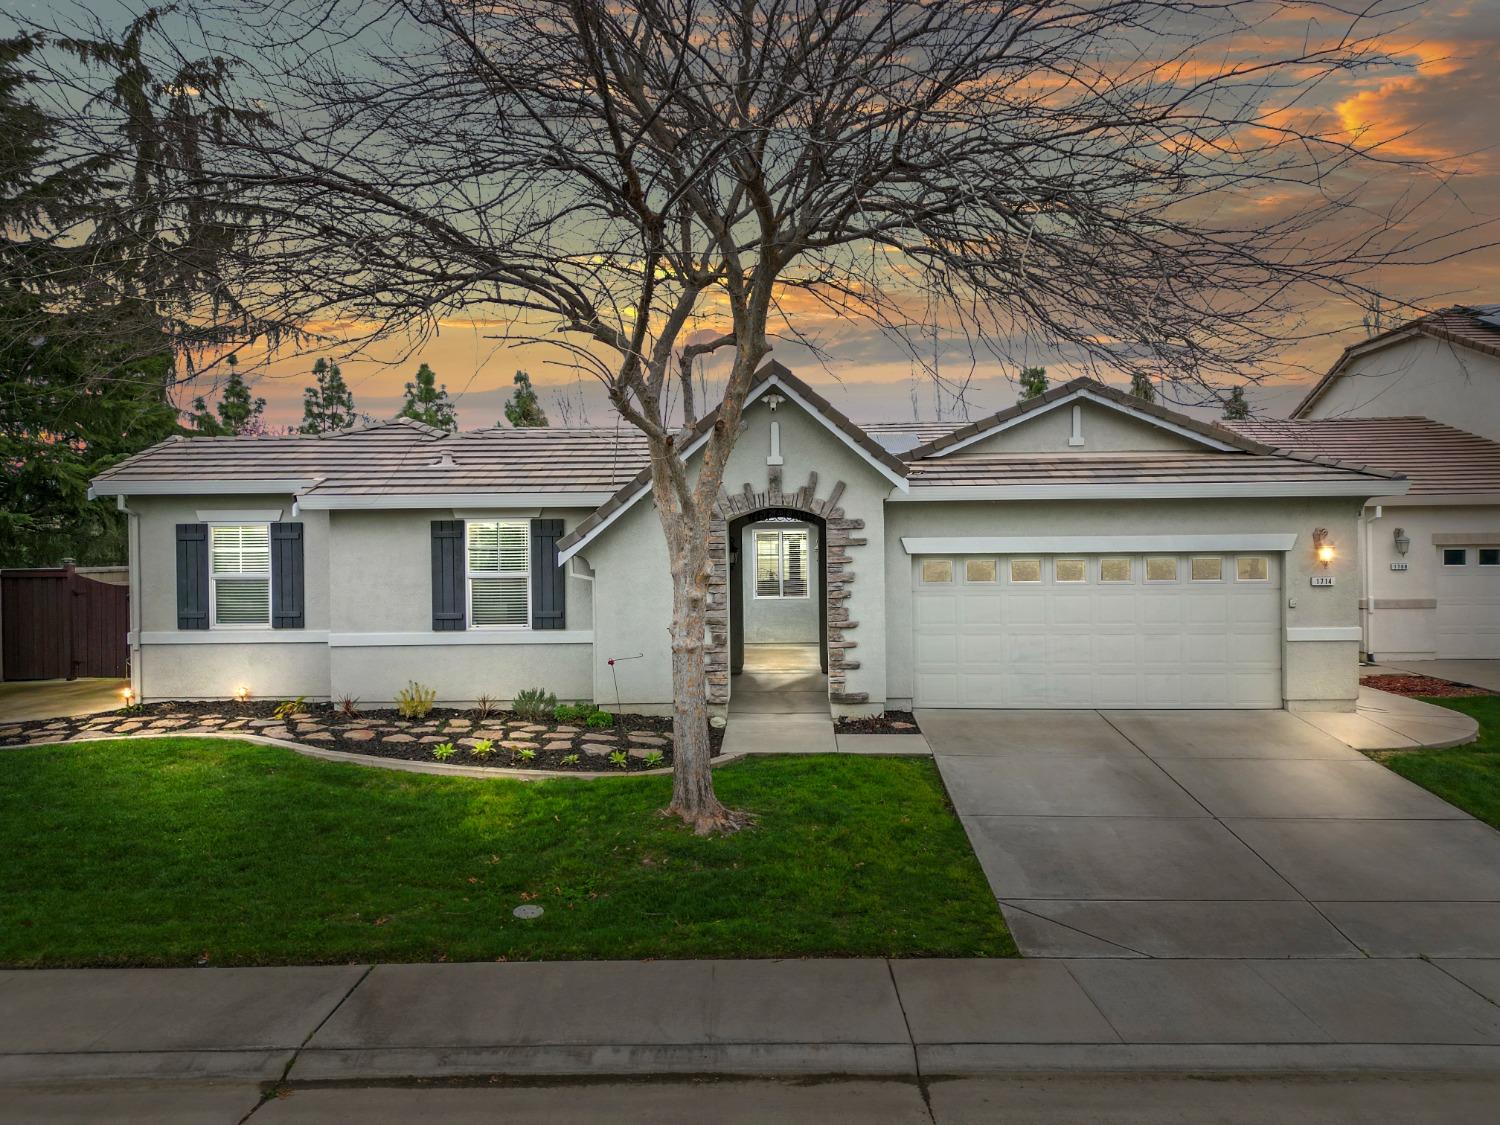 Photo of 1714 Lombard Ln in Lincoln, CA